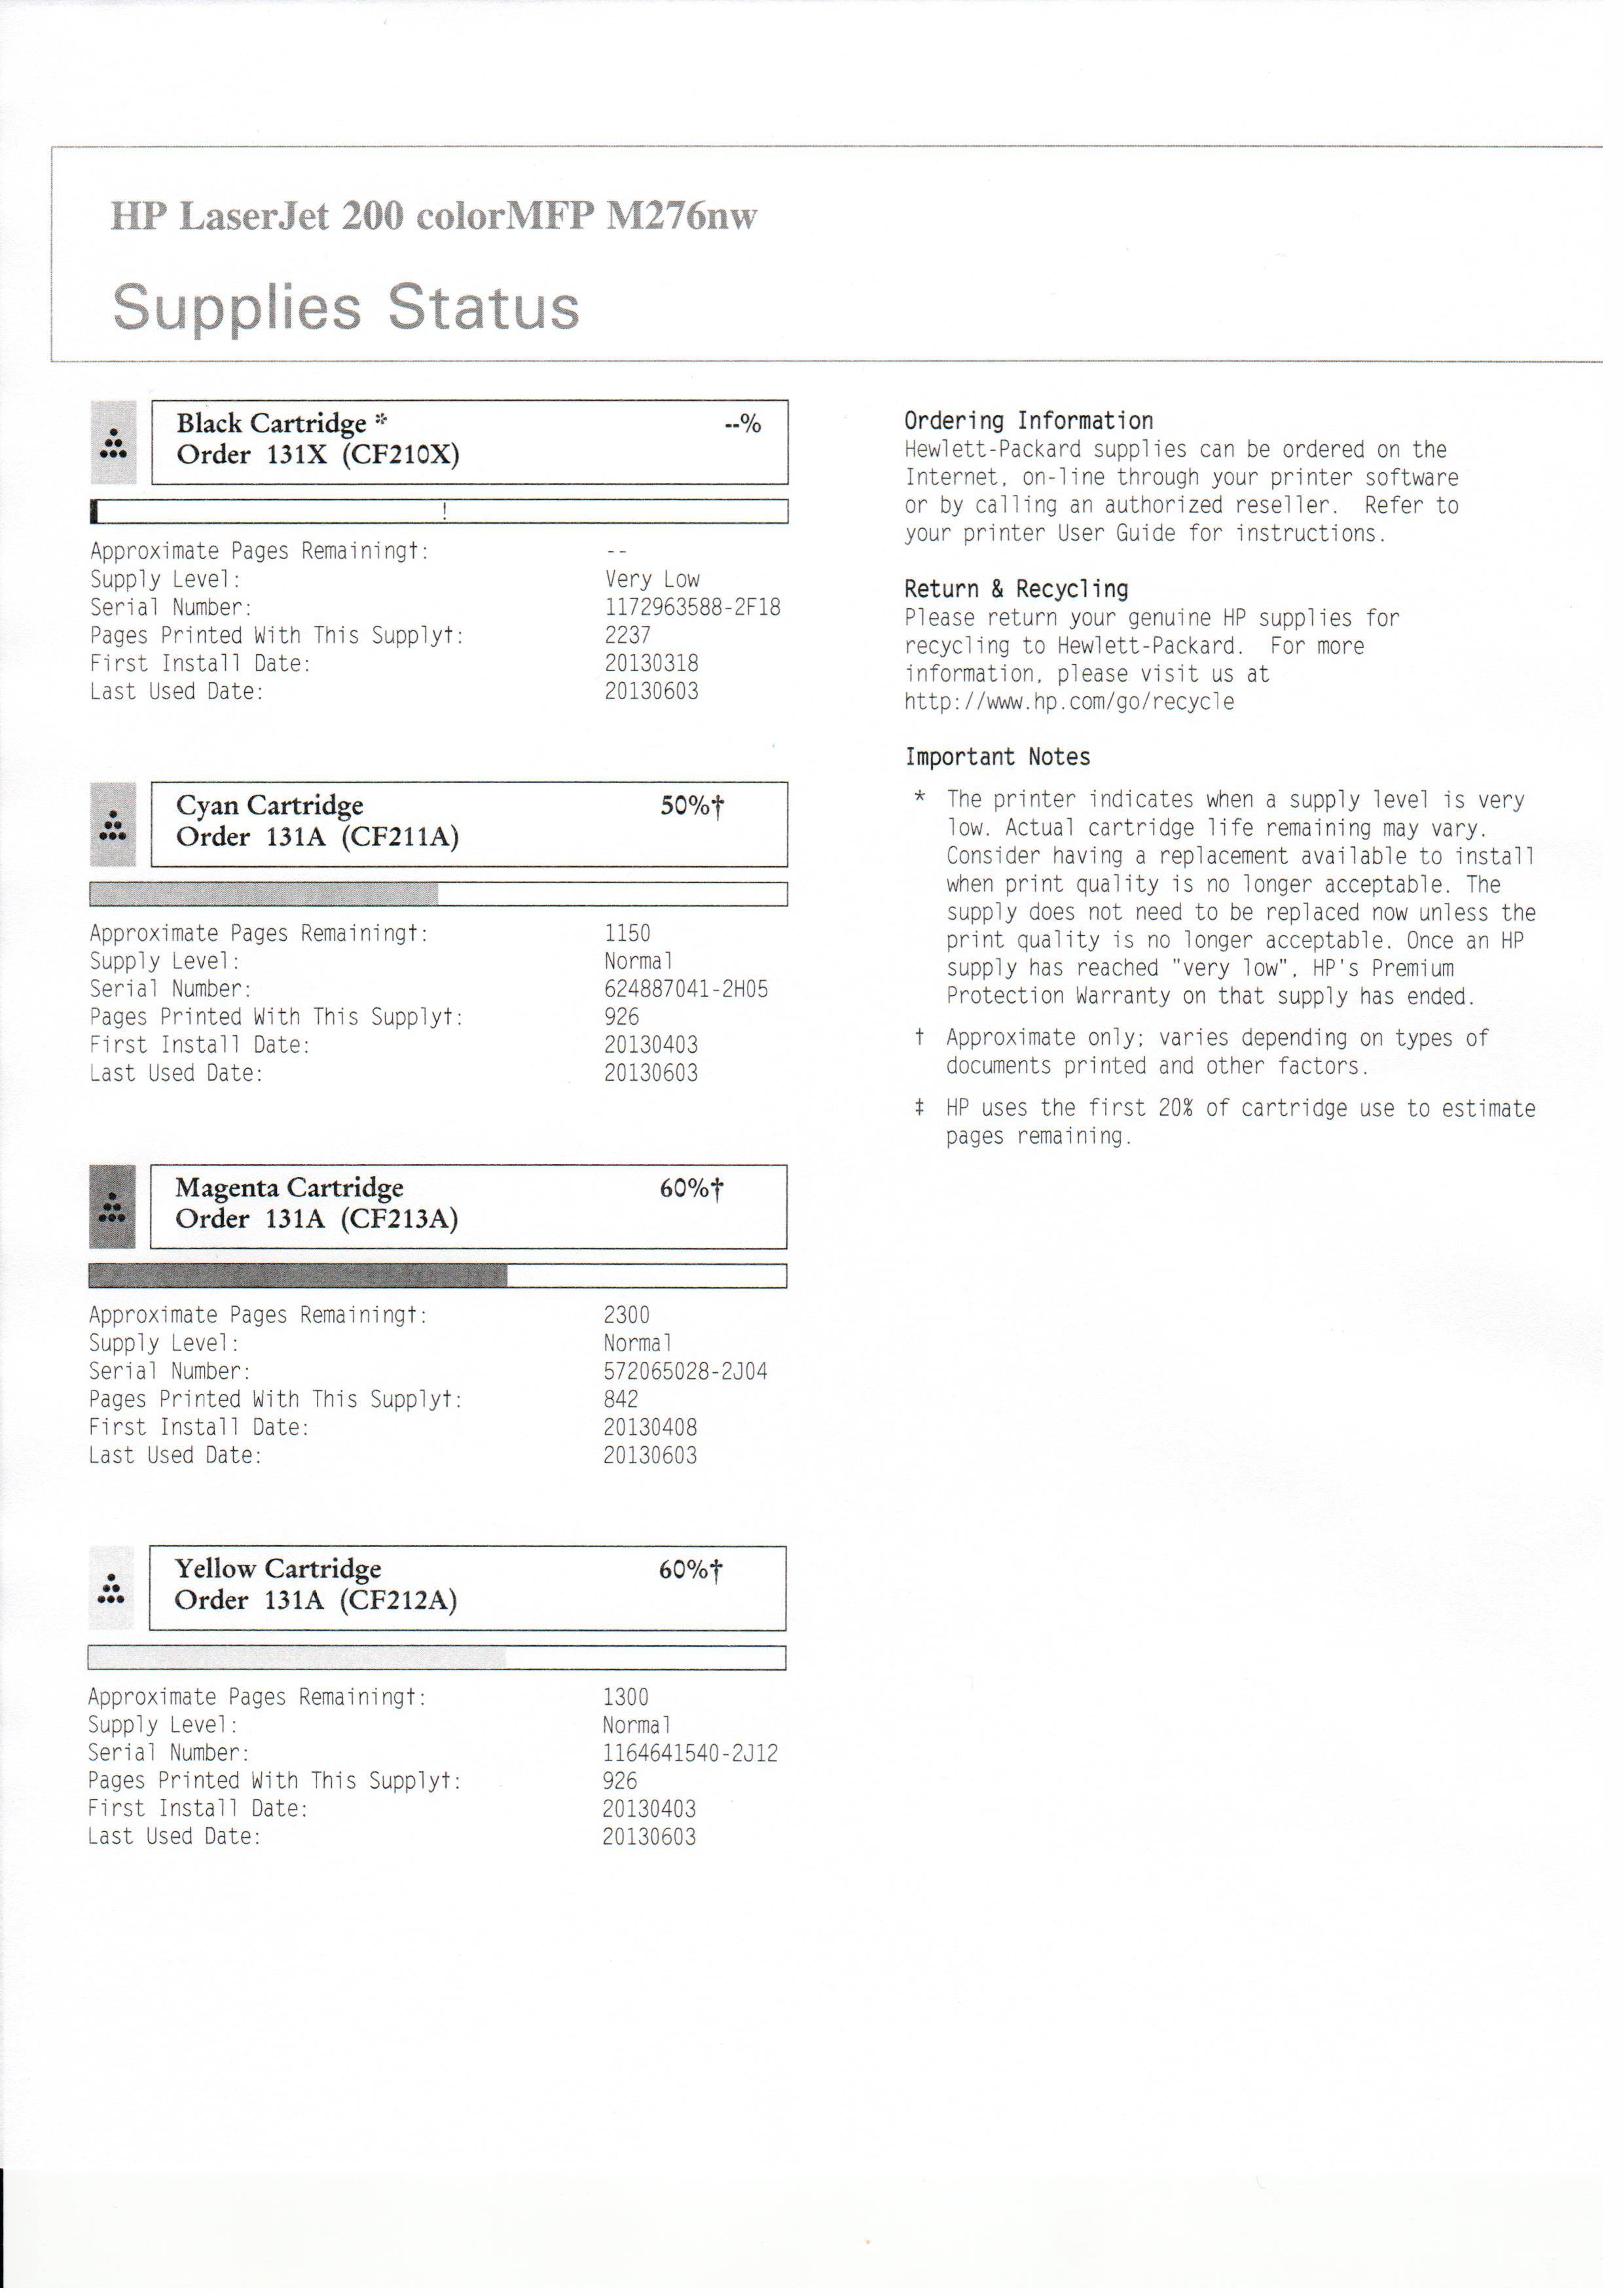 Scanned supplies status page